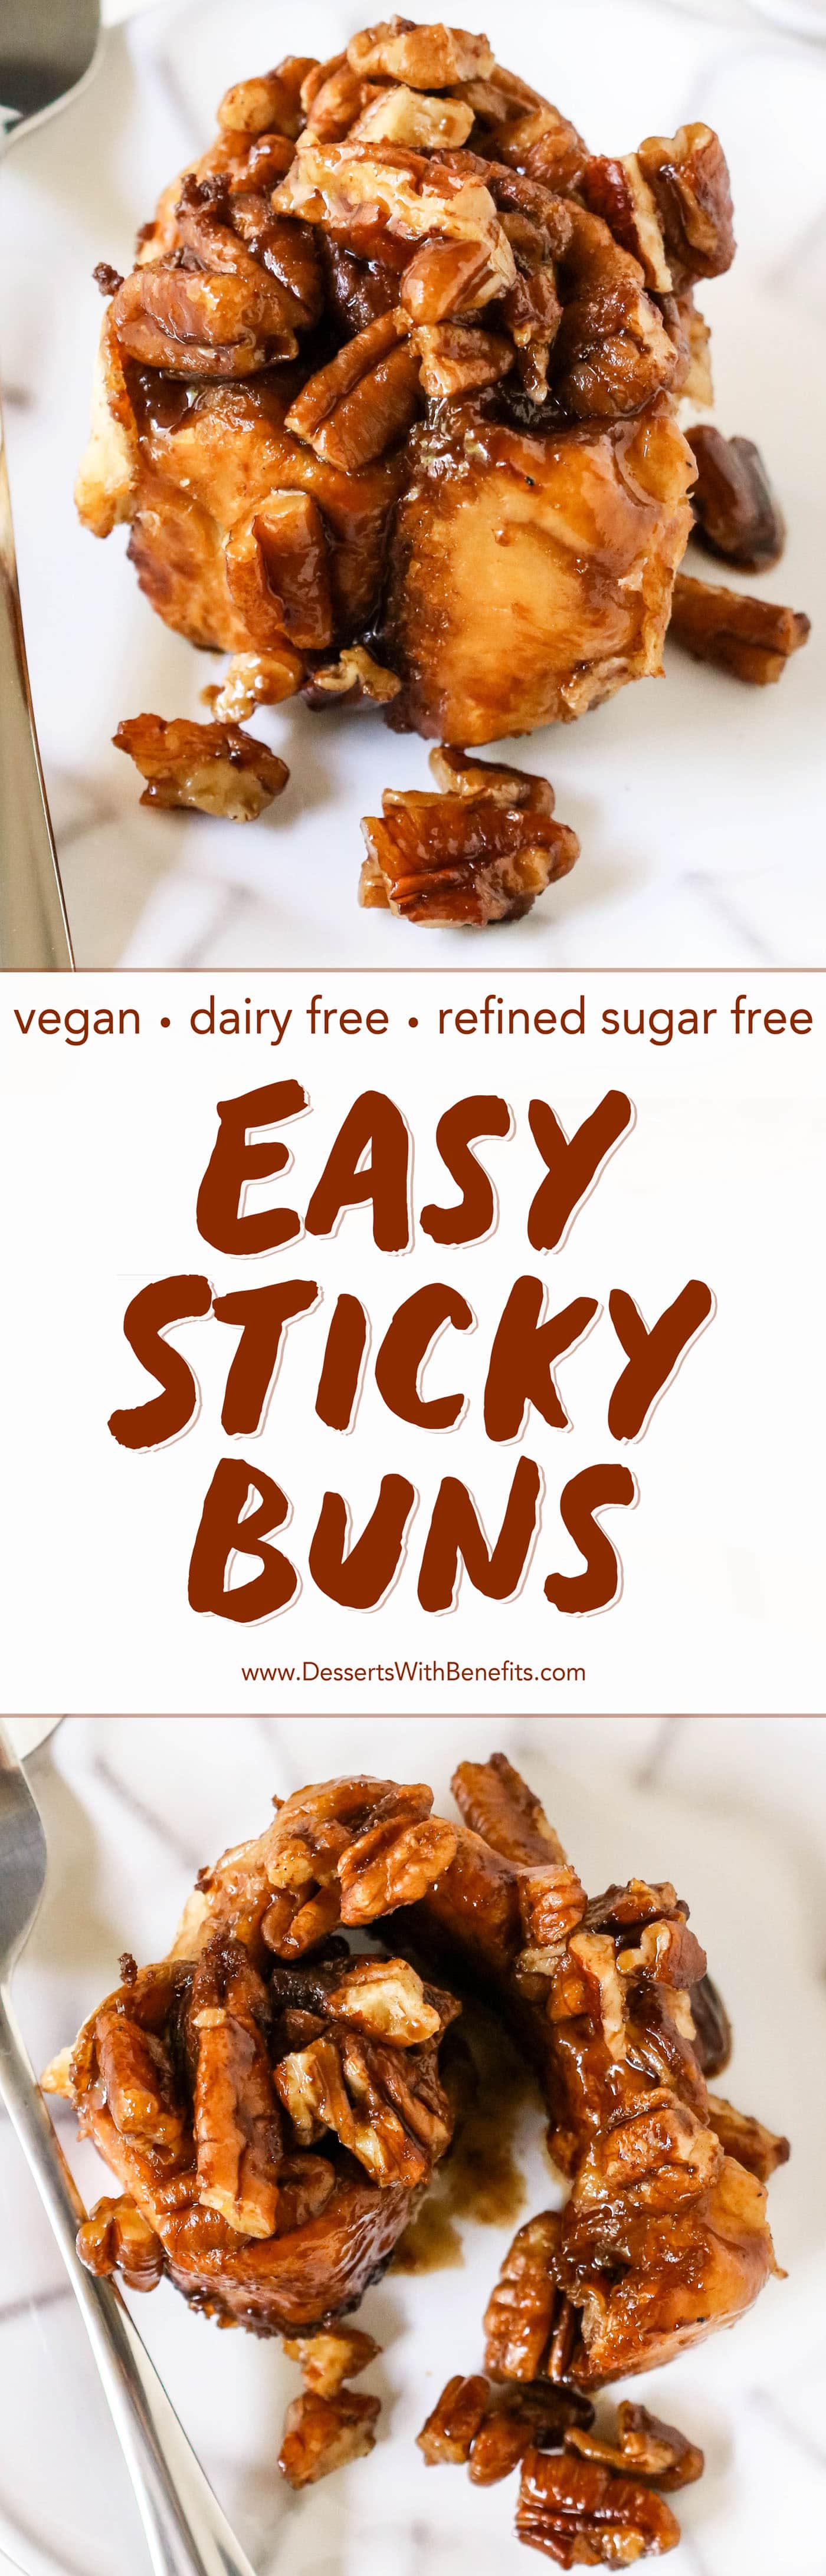 You'll wow everyone with these Sticky Buns! They're soft, fluffy, sweet, perfectly spiced with cinnamon, and topped with caramel-pecan goodness. No one will believe these are dairy free, vegan, and low in sugar.